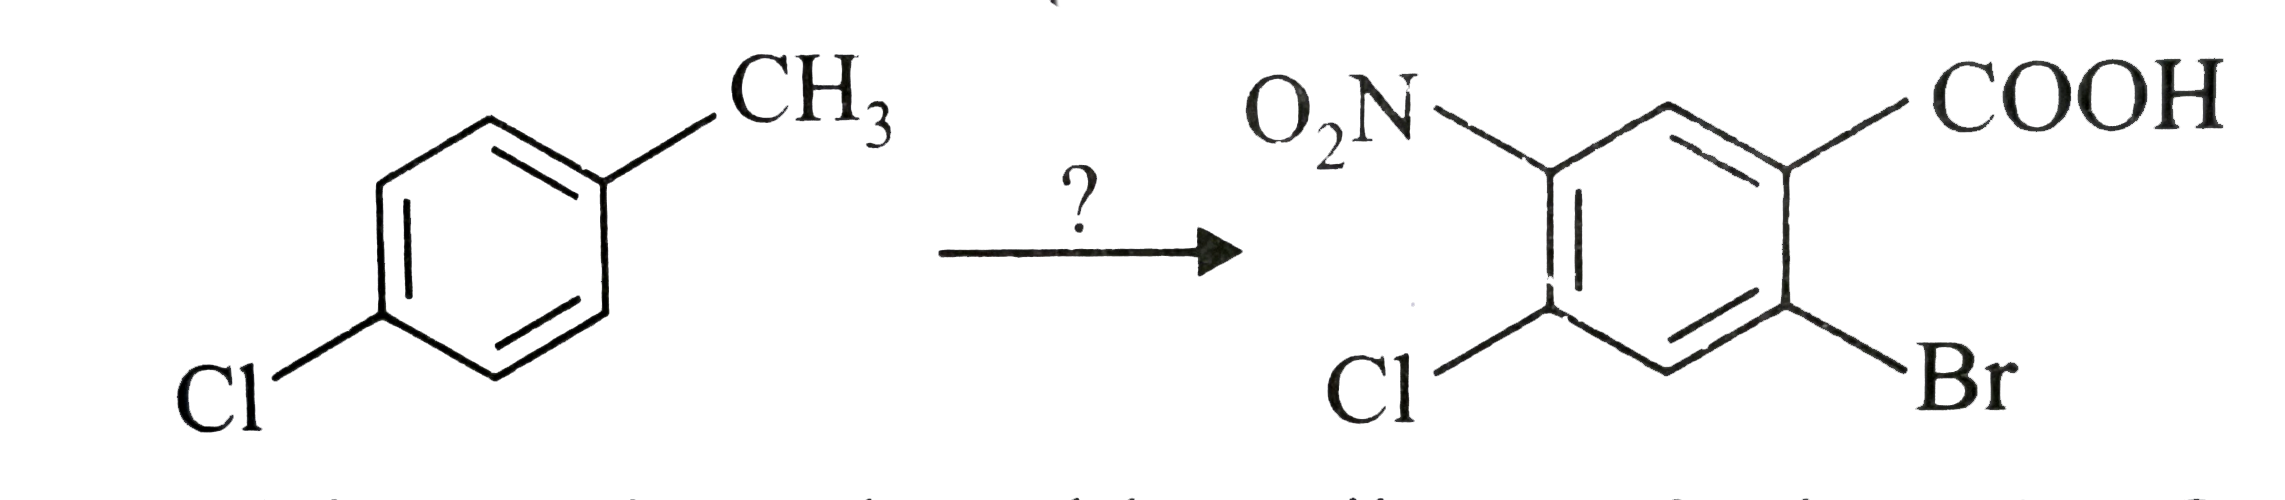 Which of the following procedures would be best for achieving the following reaction